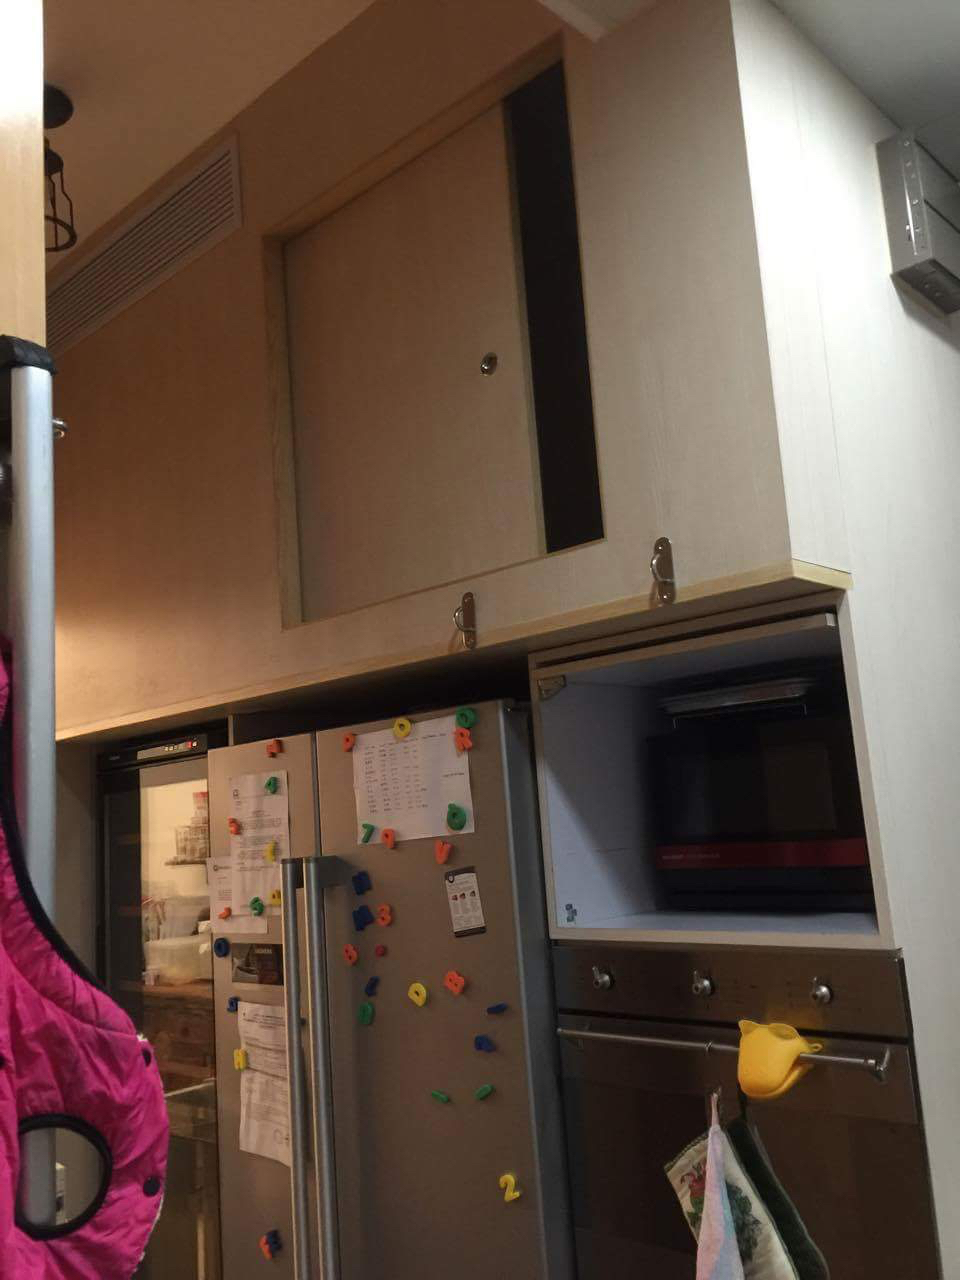 Hong Kong's Mission for Migrant Workers says it was sent this photo by a domestic worker in Hong Kong, showing a cubbyhole above a fridge that she alleges is her sleeping area (Handout—Mission for Migrant Workers)